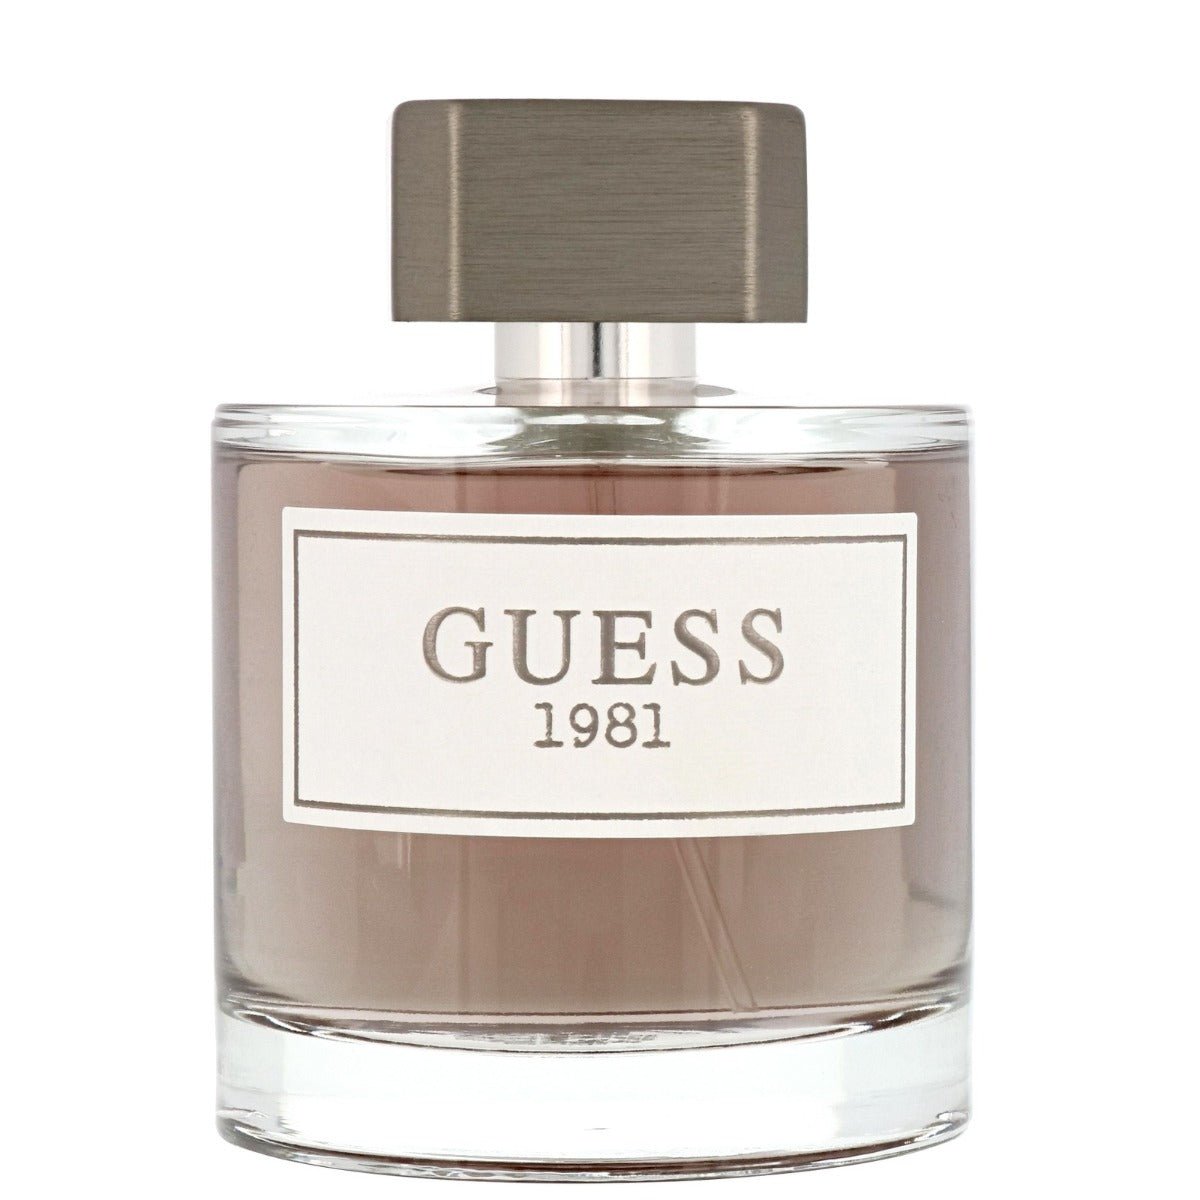 GUESS 1981 Pour Homme EDT For Men 100Ml - AllurebeautypkGUESS 1981 Pour Homme EDT For Men 100Ml